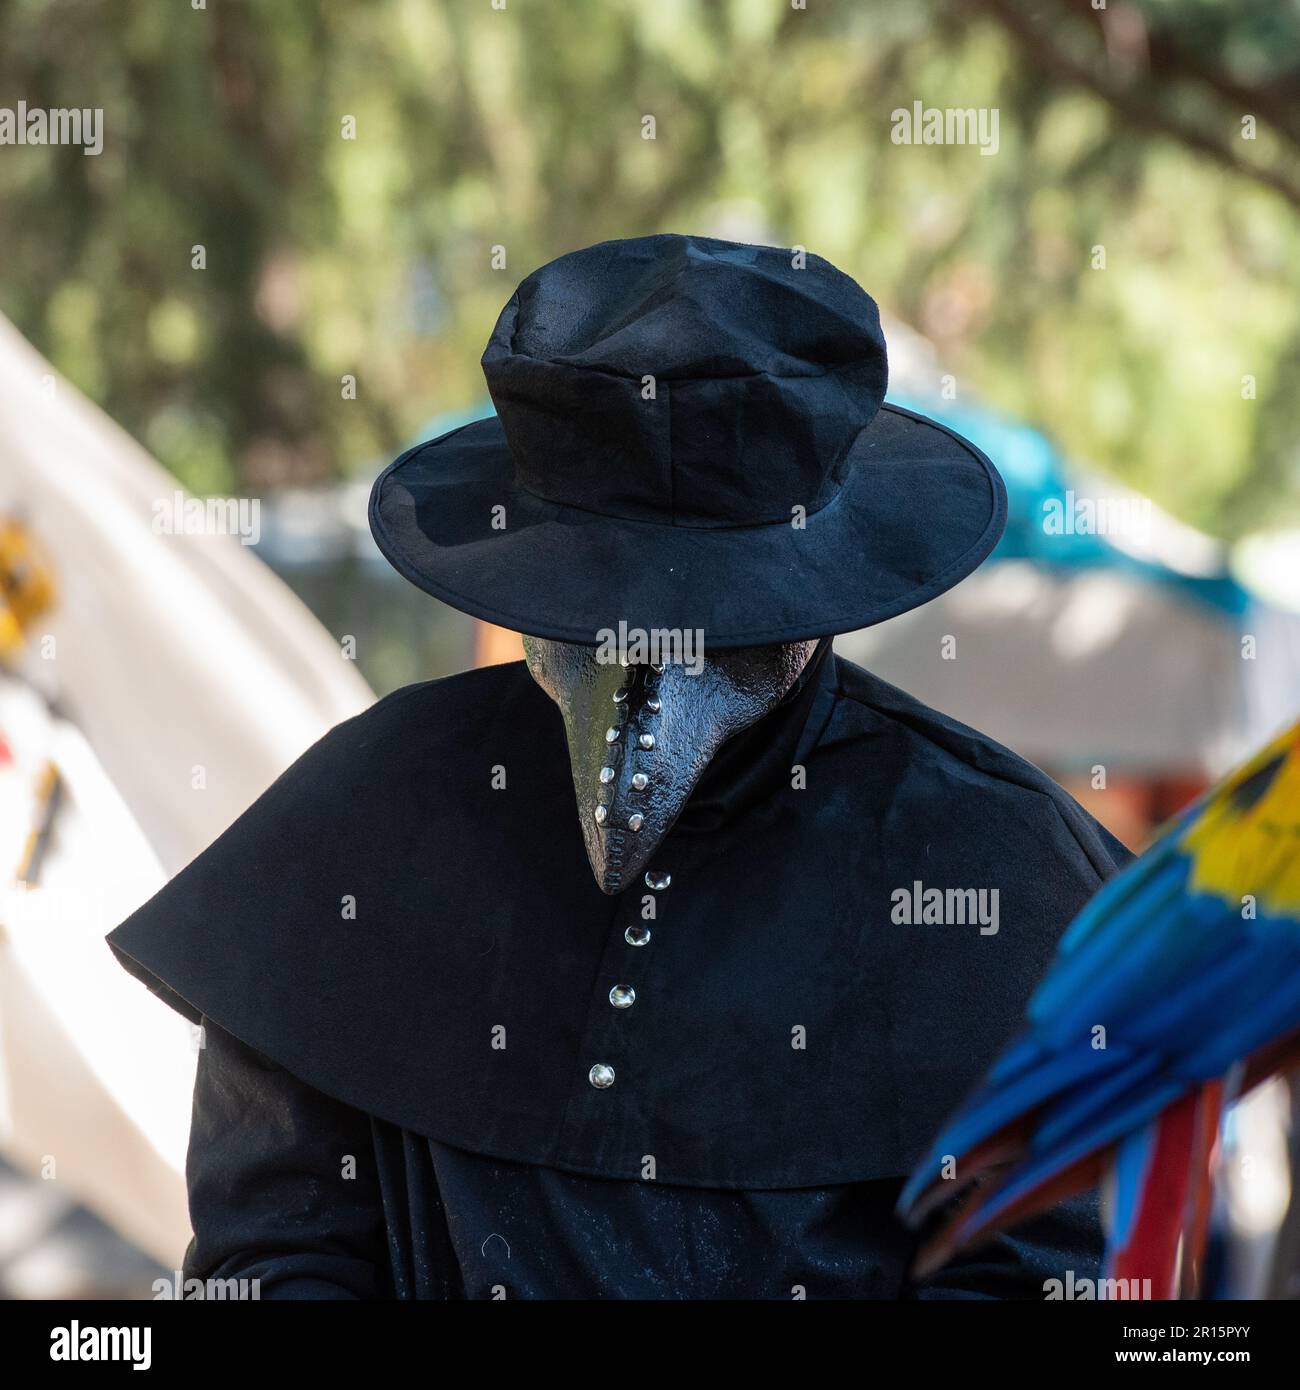 Folsom, CA, September 24, 2022. Long nose renaissance mask at the Folsom Renaissance Faire. After a hiatus due to the coronavirus pandemic, this fun h Stock Photo